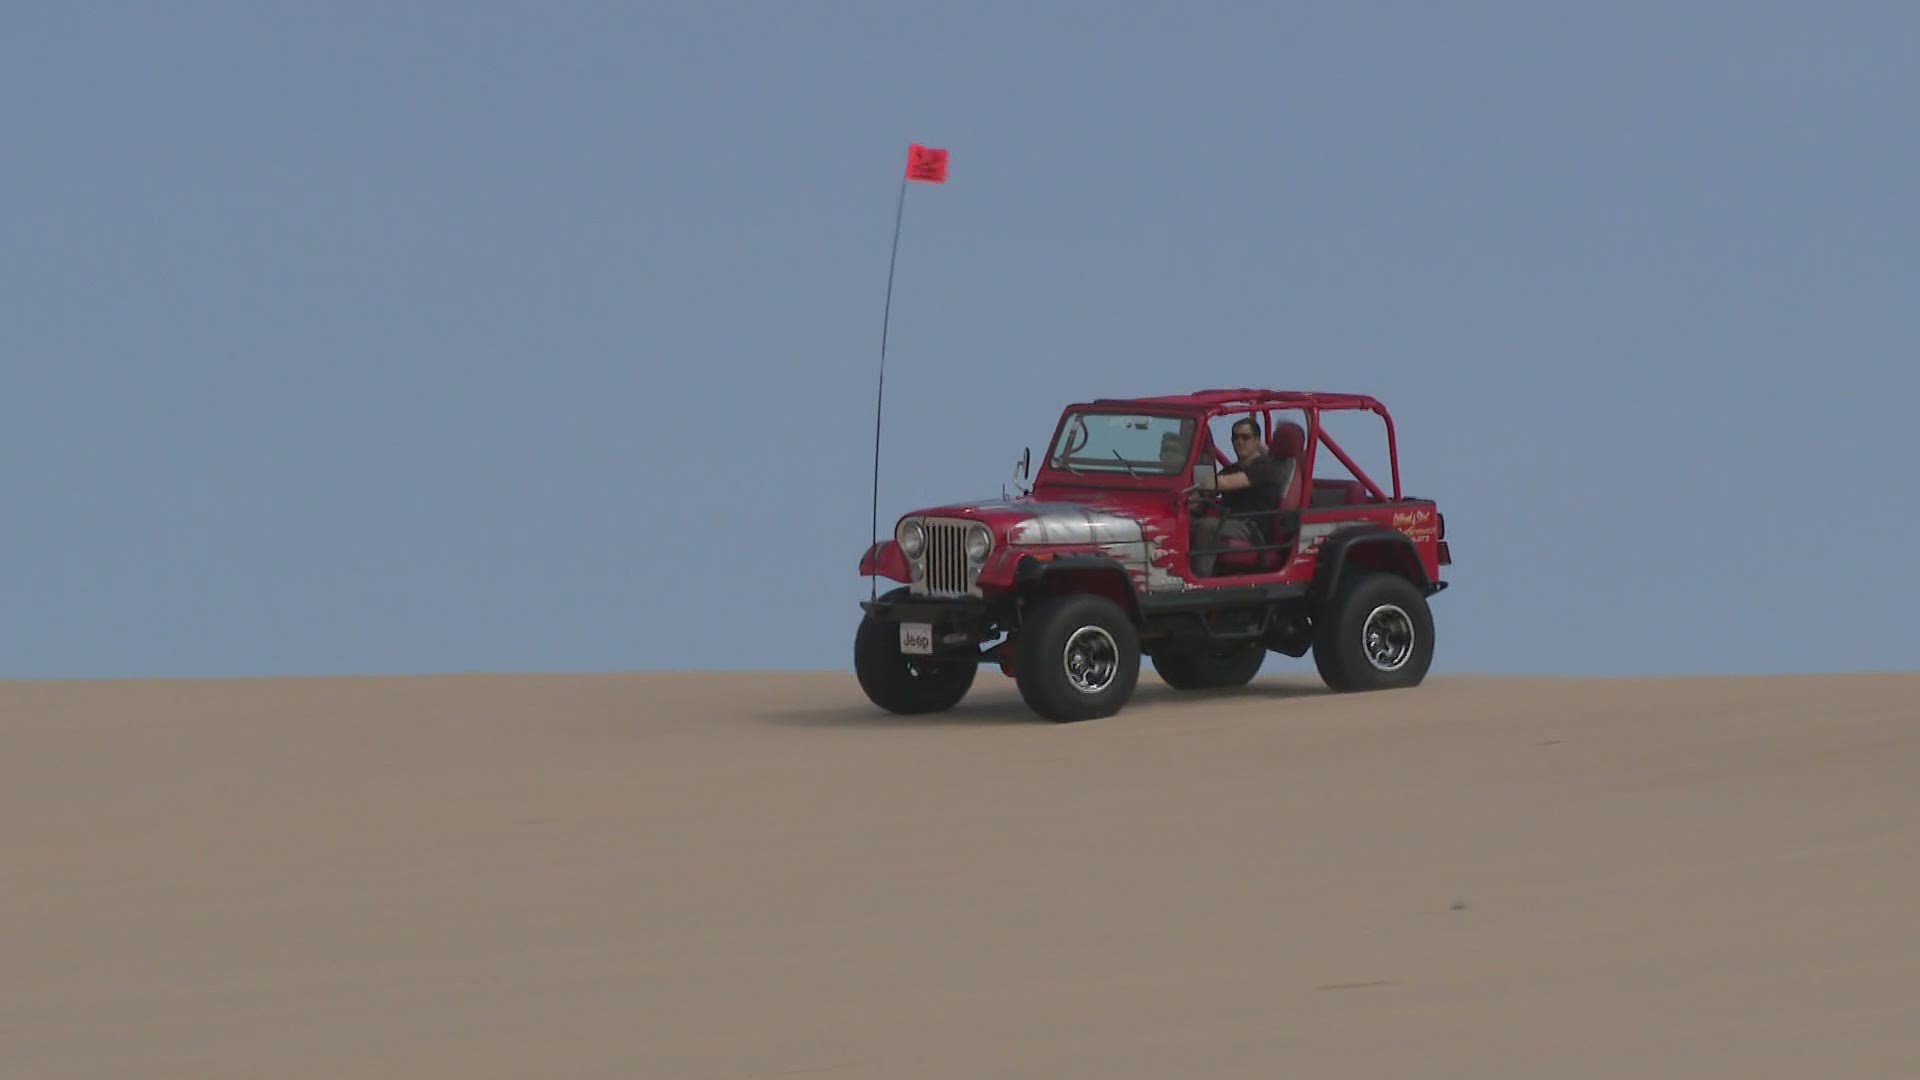 Over 1,000 Jeep vehicles are expected at the 5th Anniversary Silver Lake Sand Dunes Jeep Invasion.